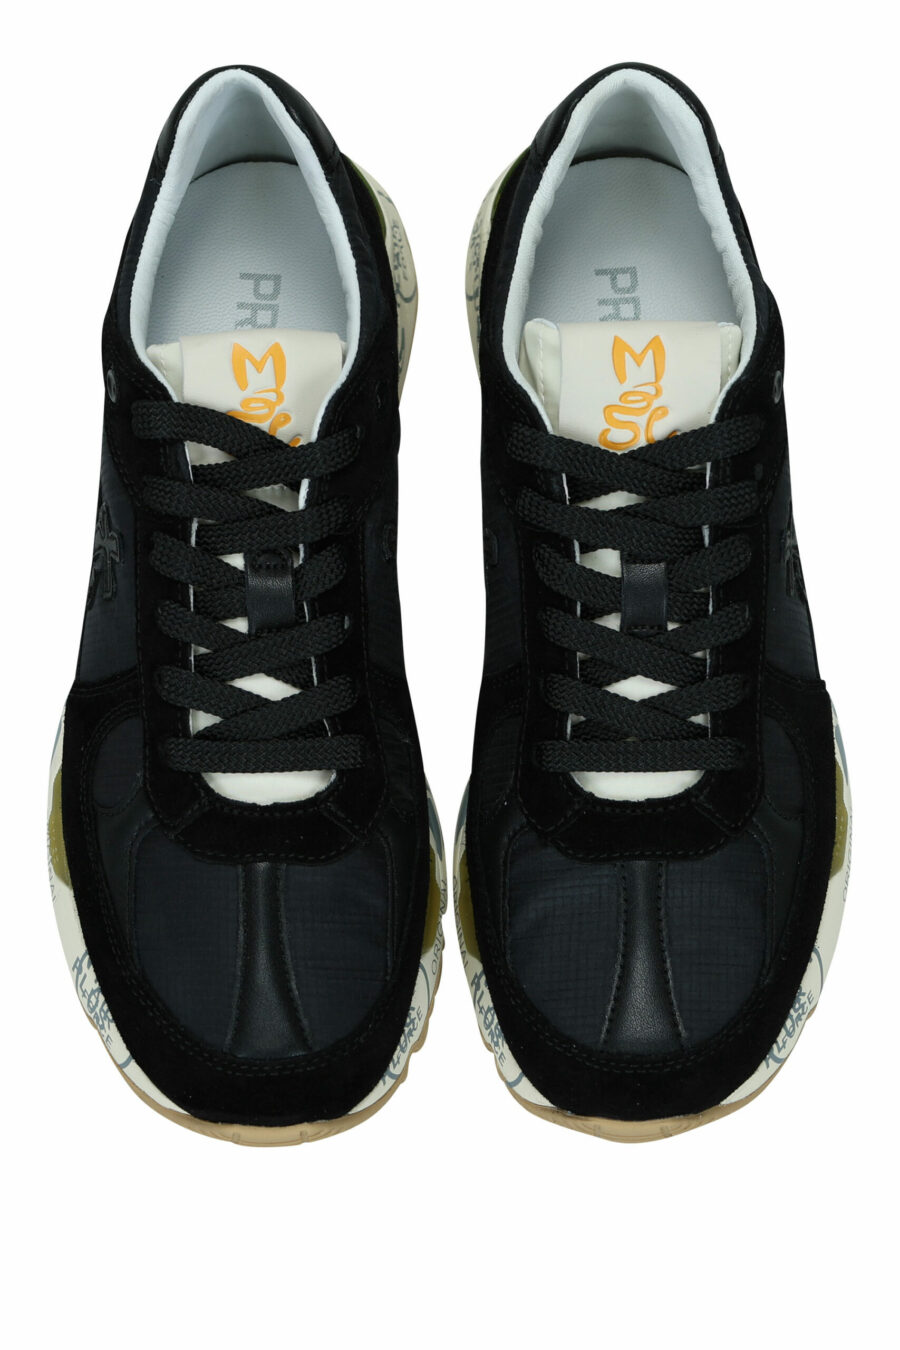 Black mix trainers with white sole "Mase 6624" - 8053680270159 4 scaled